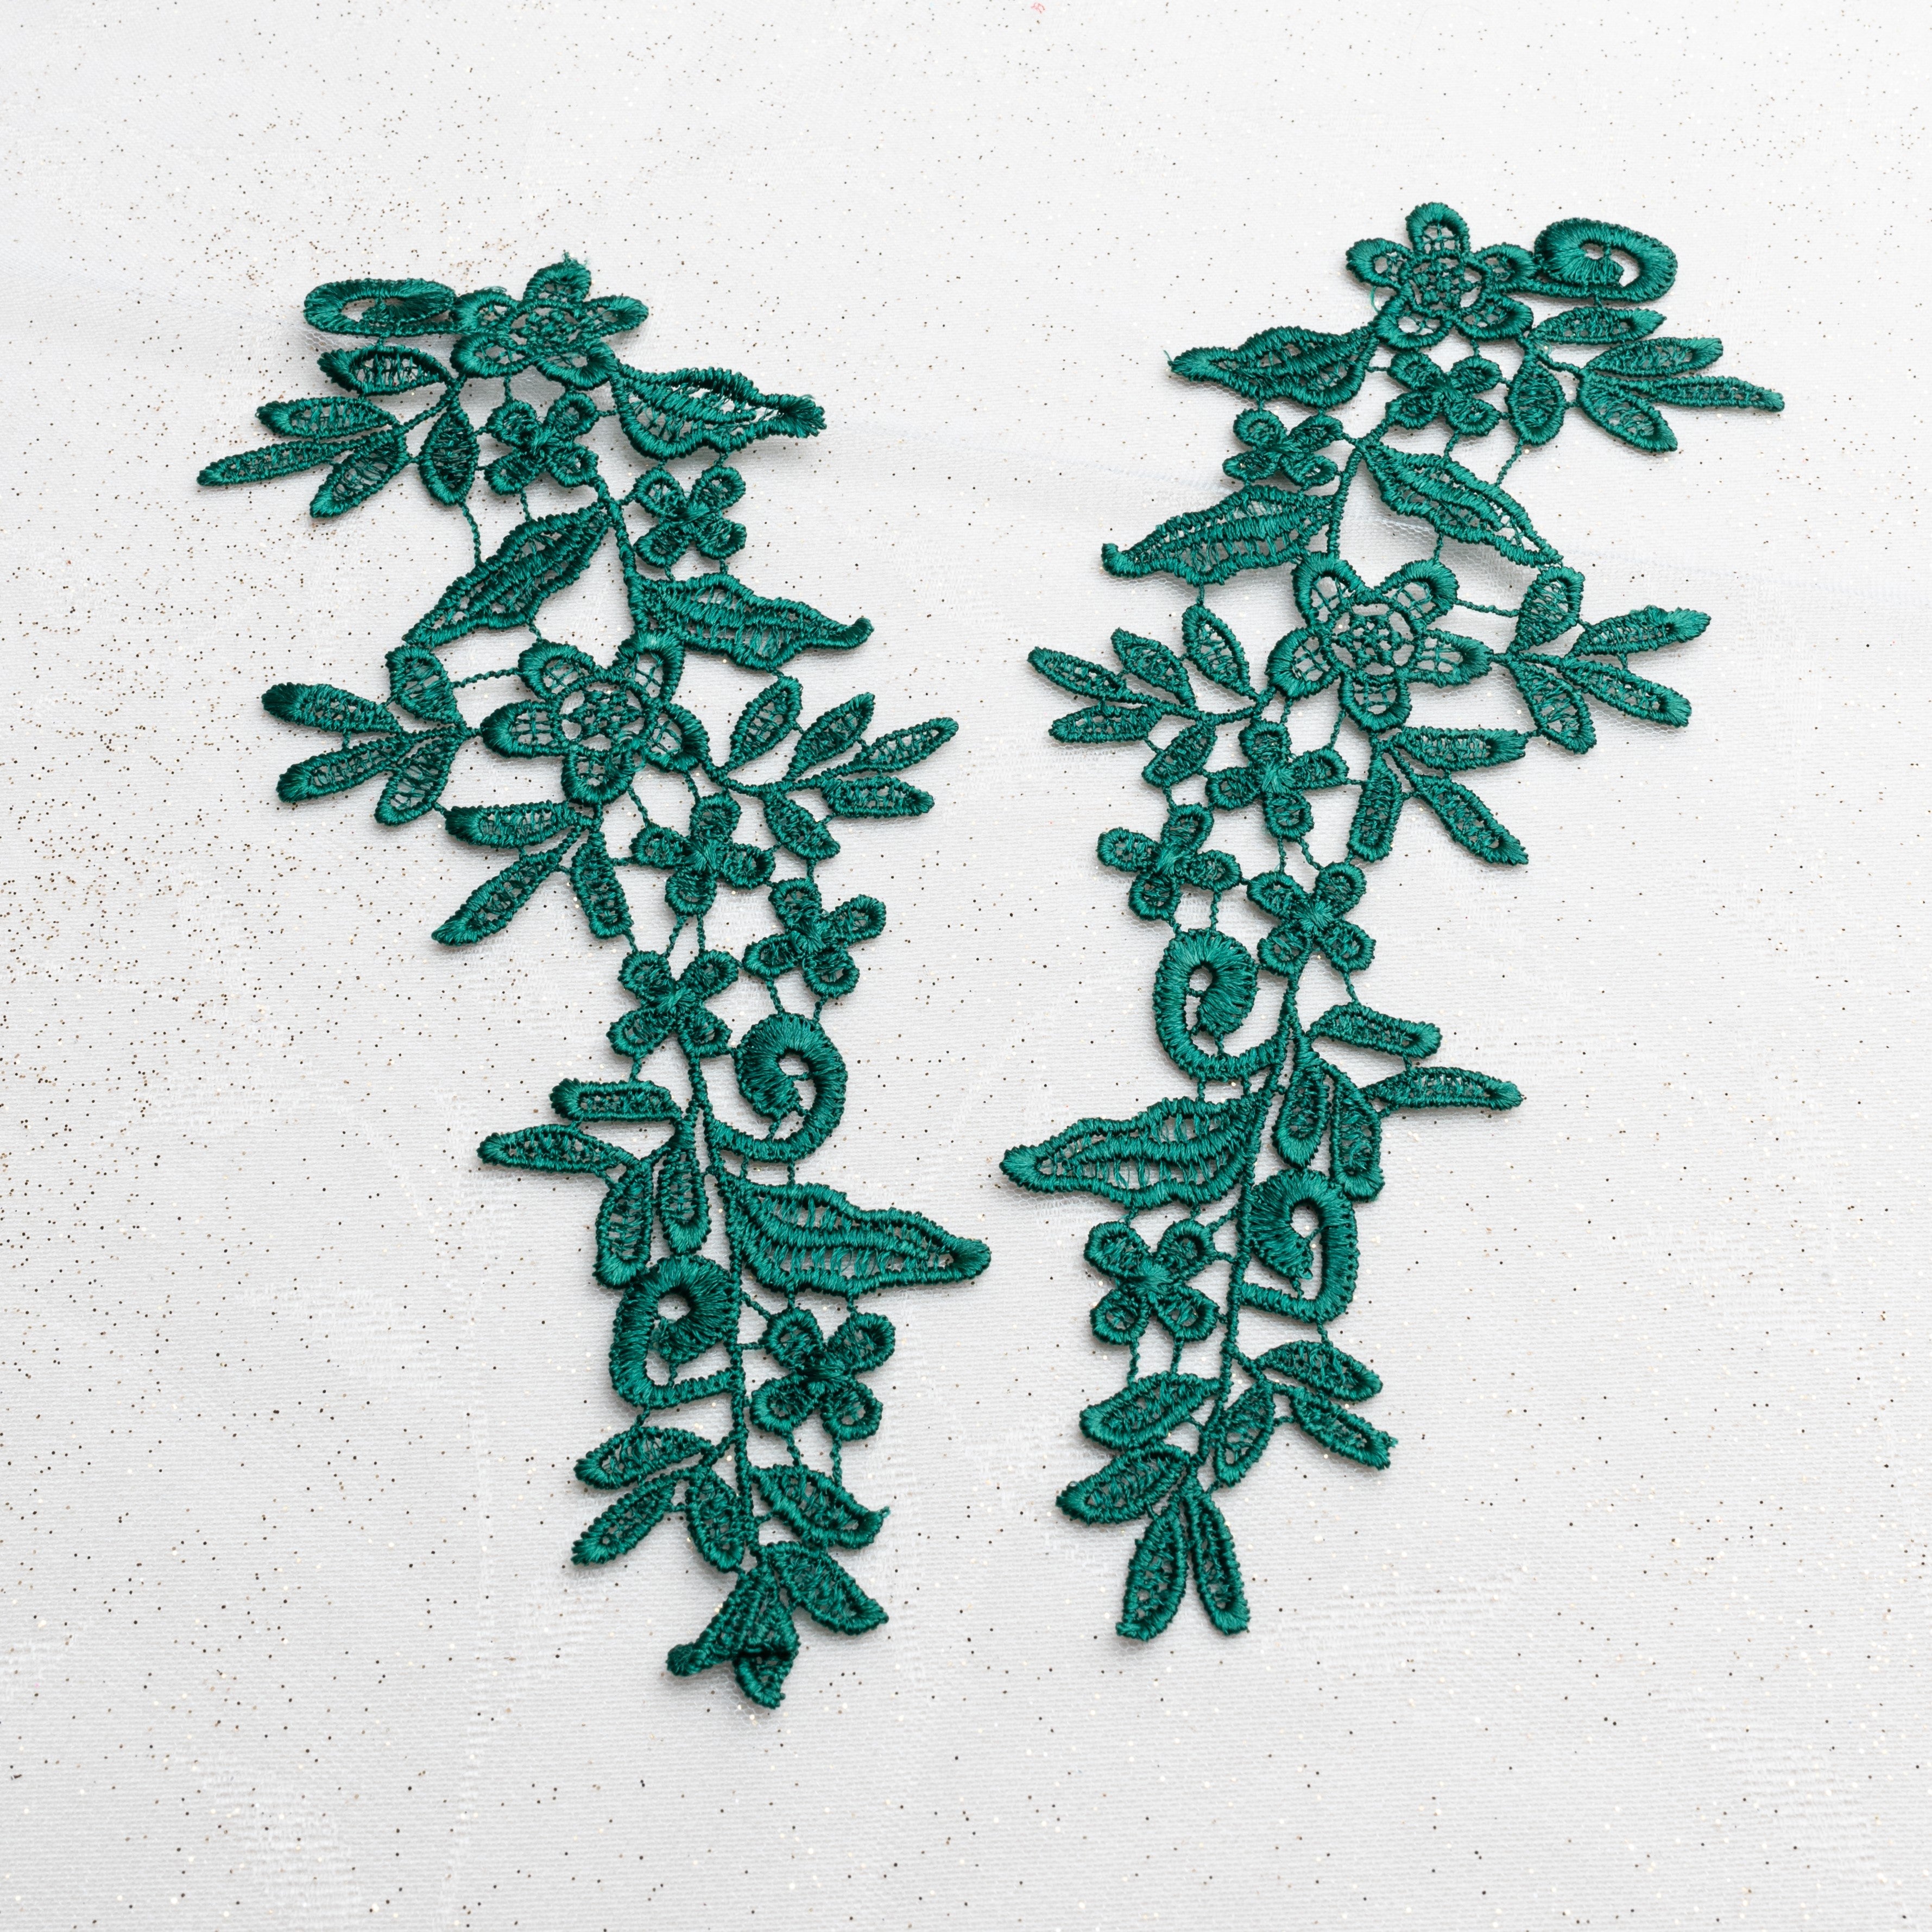 Heavily embroidered dark green lace applique pair with a floral design. This versatile applique pair can be embellished and decorated with crystals, pearls, beads and sequins for beautiful dance and stage costumes.